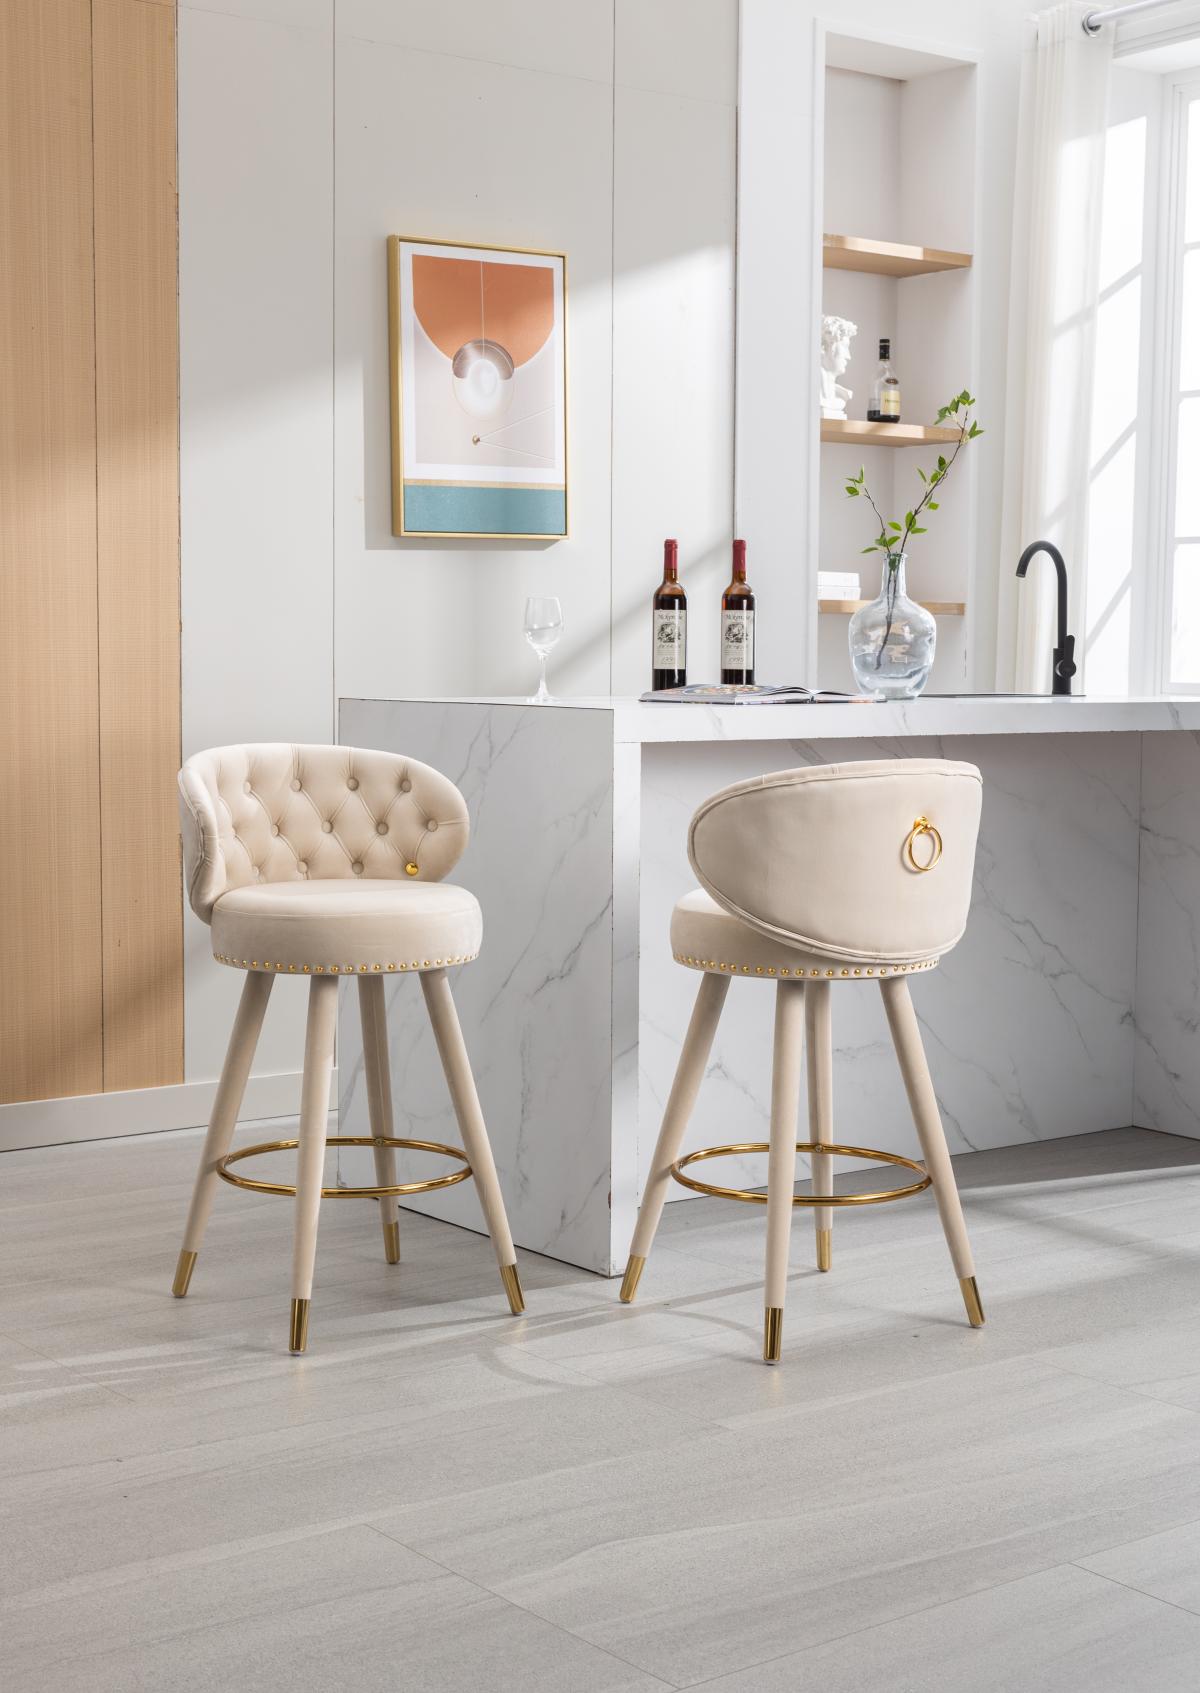 COOLMORE Counter Height Bar Stools Set of 2 for Kitchen Counter Solid Wood Legs with a fixed height of 360 degrees